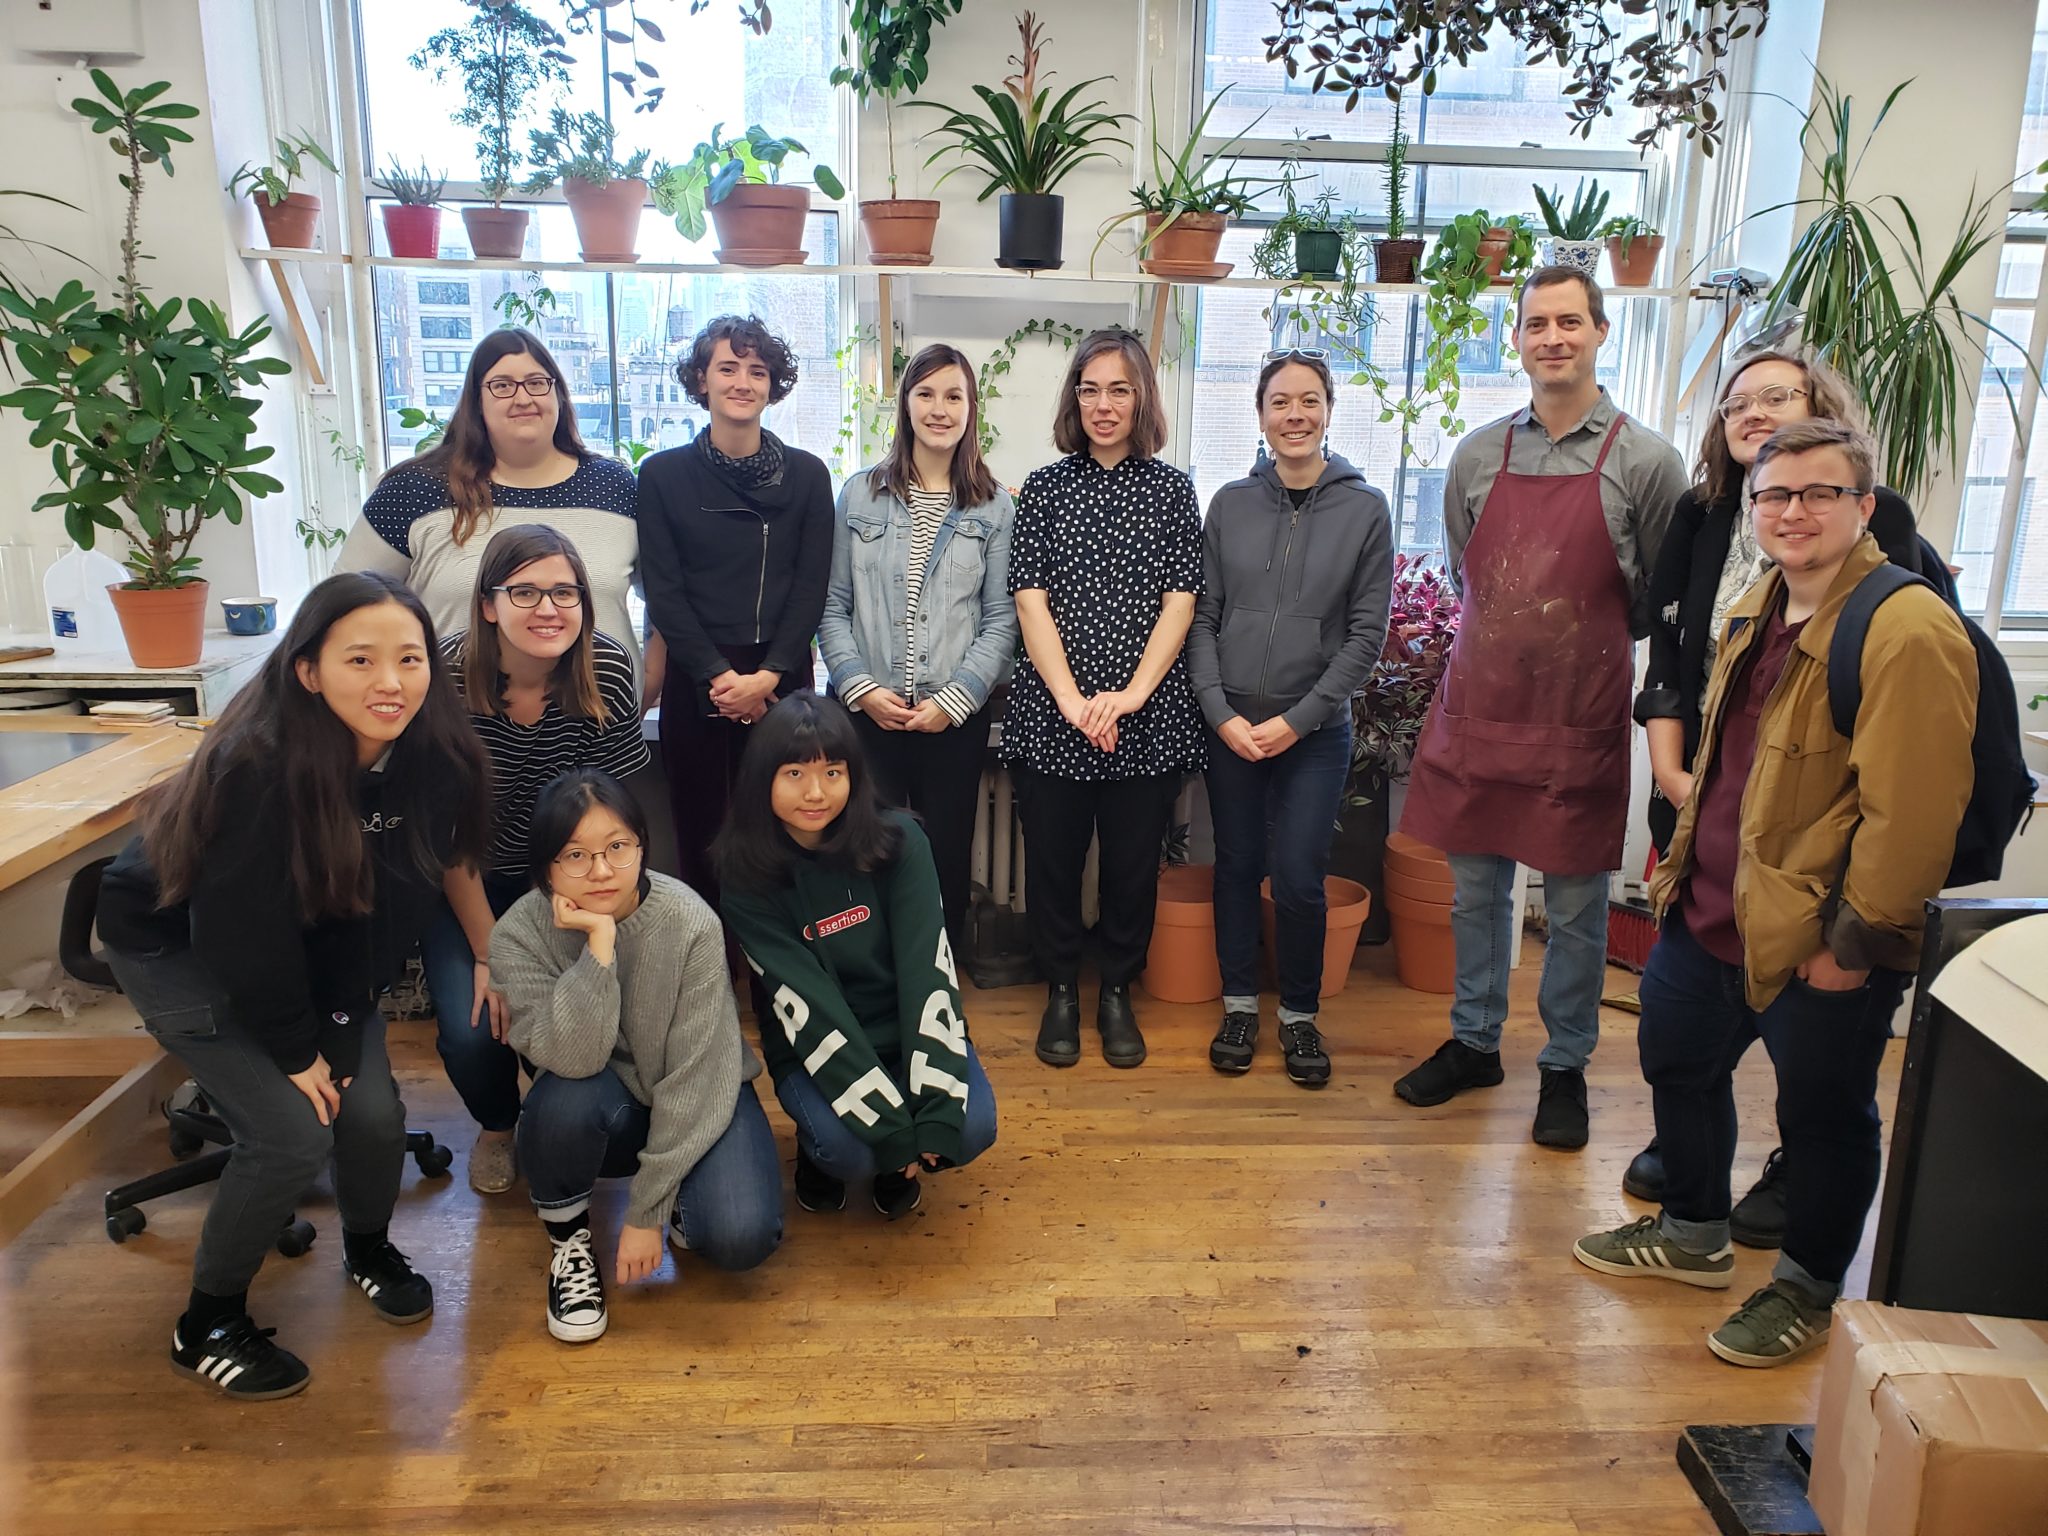 Pace Editions visit during Fall 2019 NYC Trip